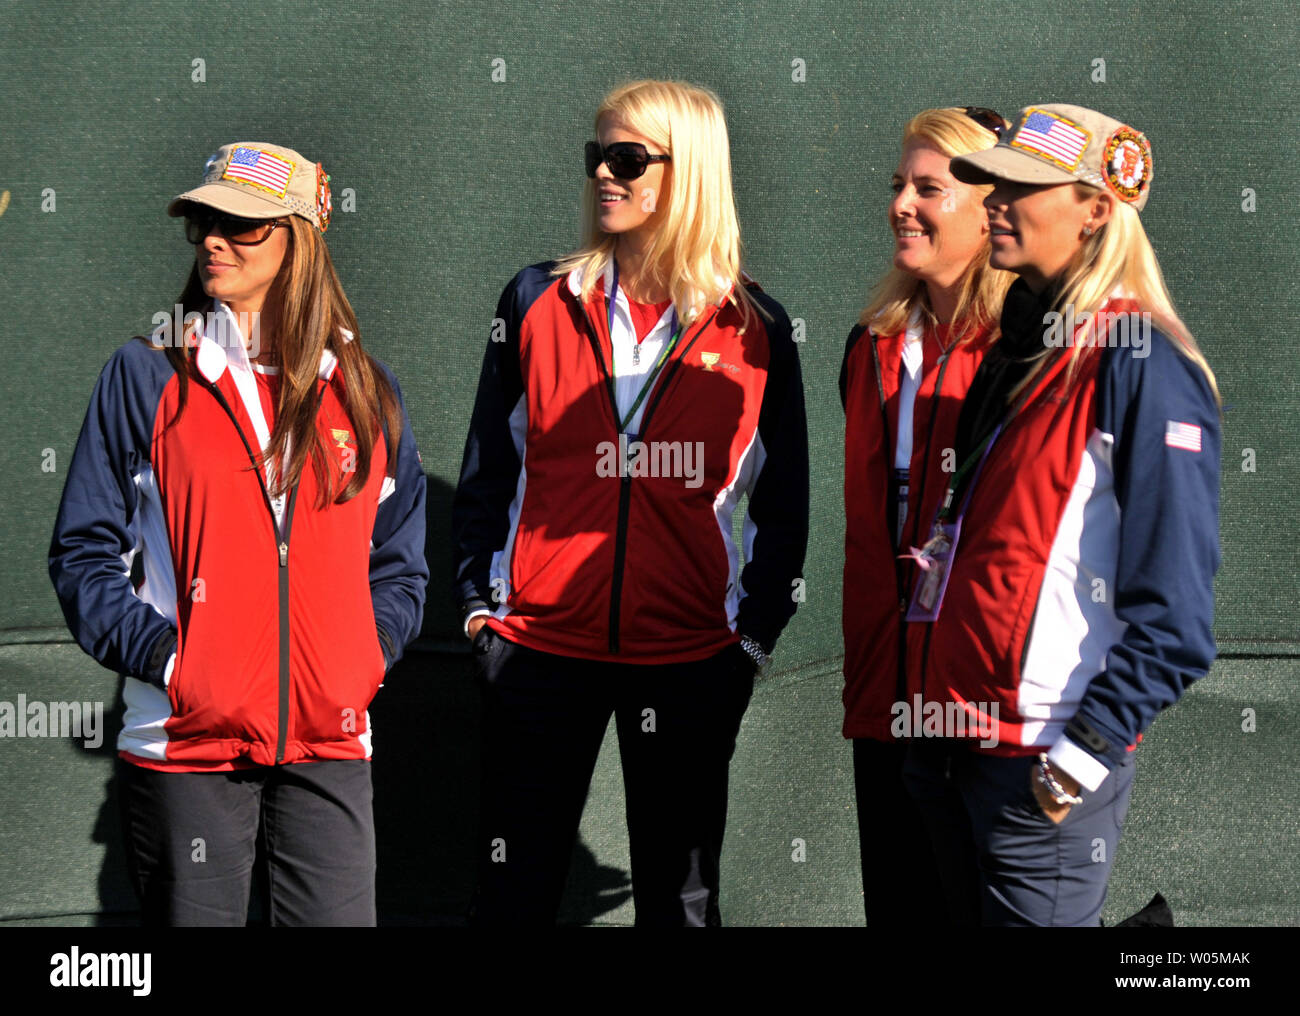 Elin Nordegren (2nd-L), the wife of United States team member Tiger Woods, is joined by other wives as she watches her husband play on the 15th green during the second round of The Presidents Cup at Harding Park Golf Course in San Francisco, California on October 9, 2009.    UPI/Kevin Dietsch Stock Photo